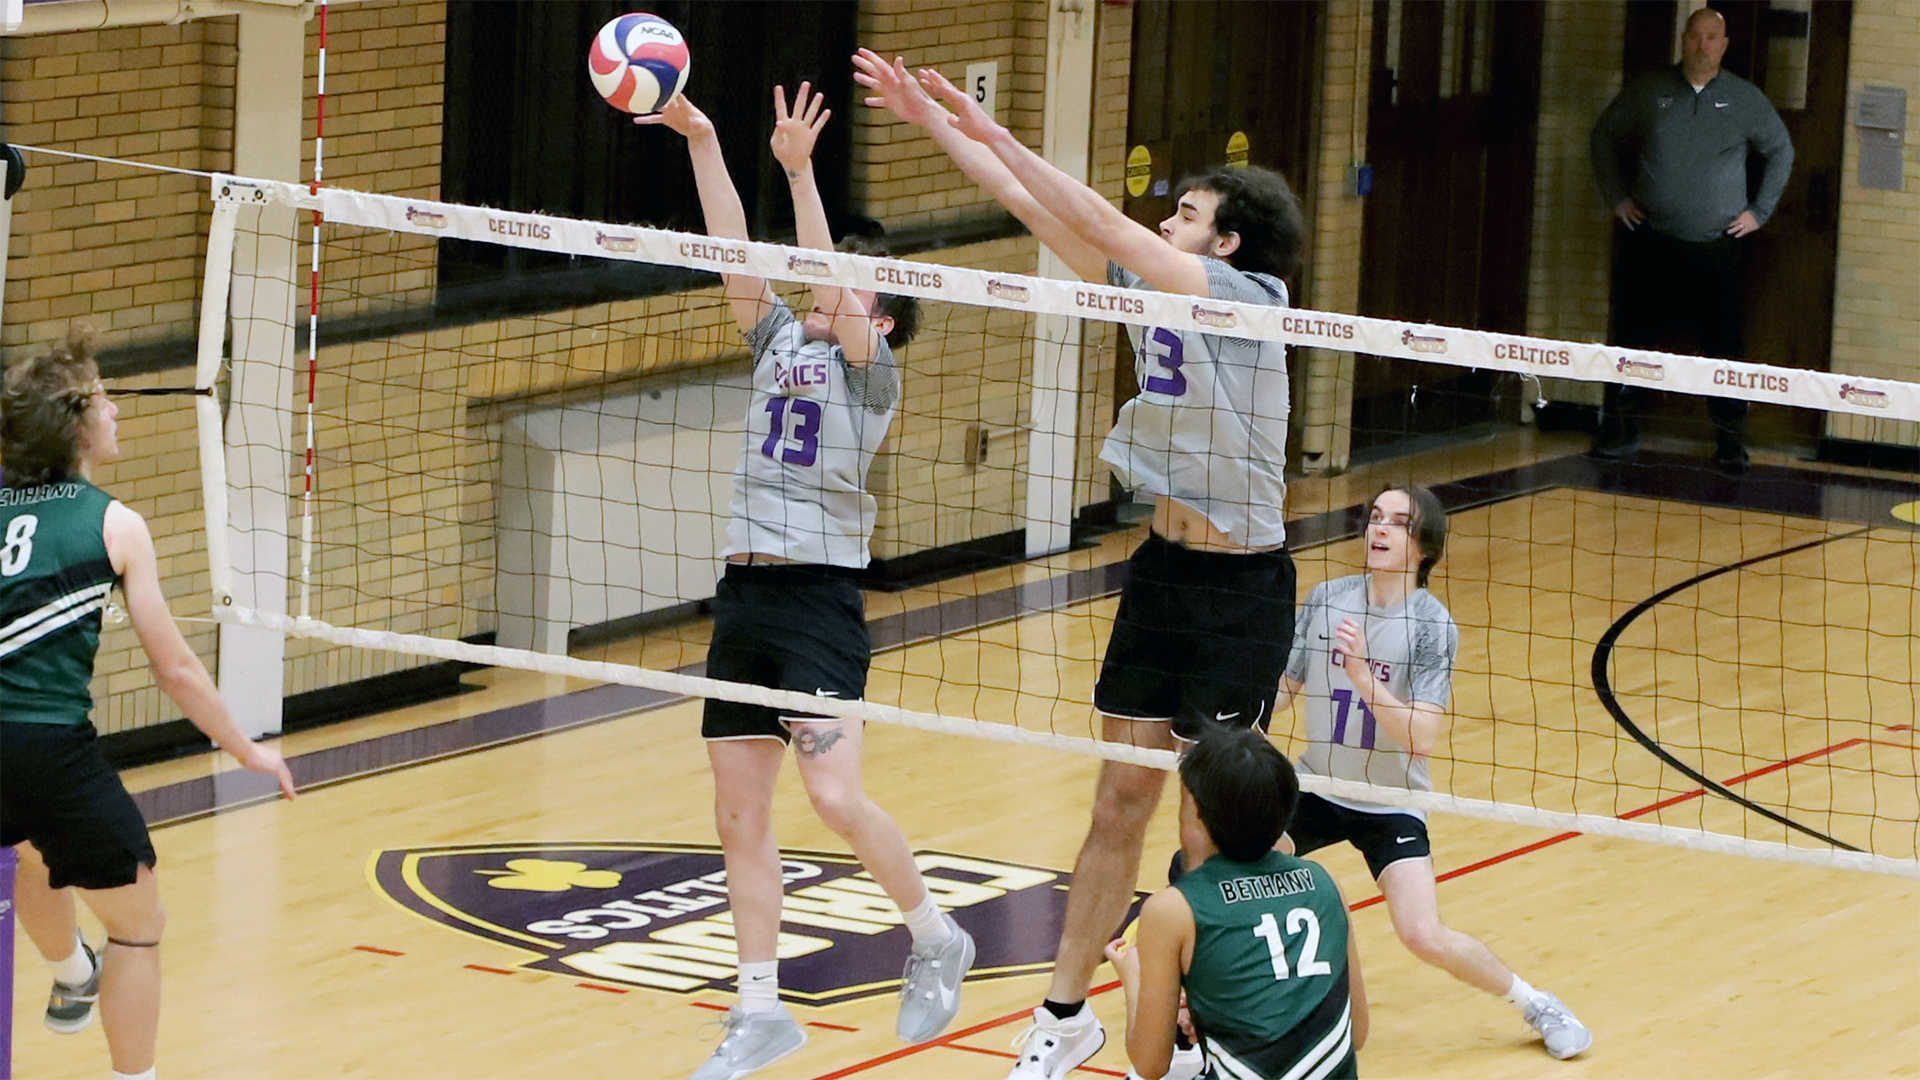 From left: James Stone and Gavin McLain go up for the block. Photo by Robert Cifone.